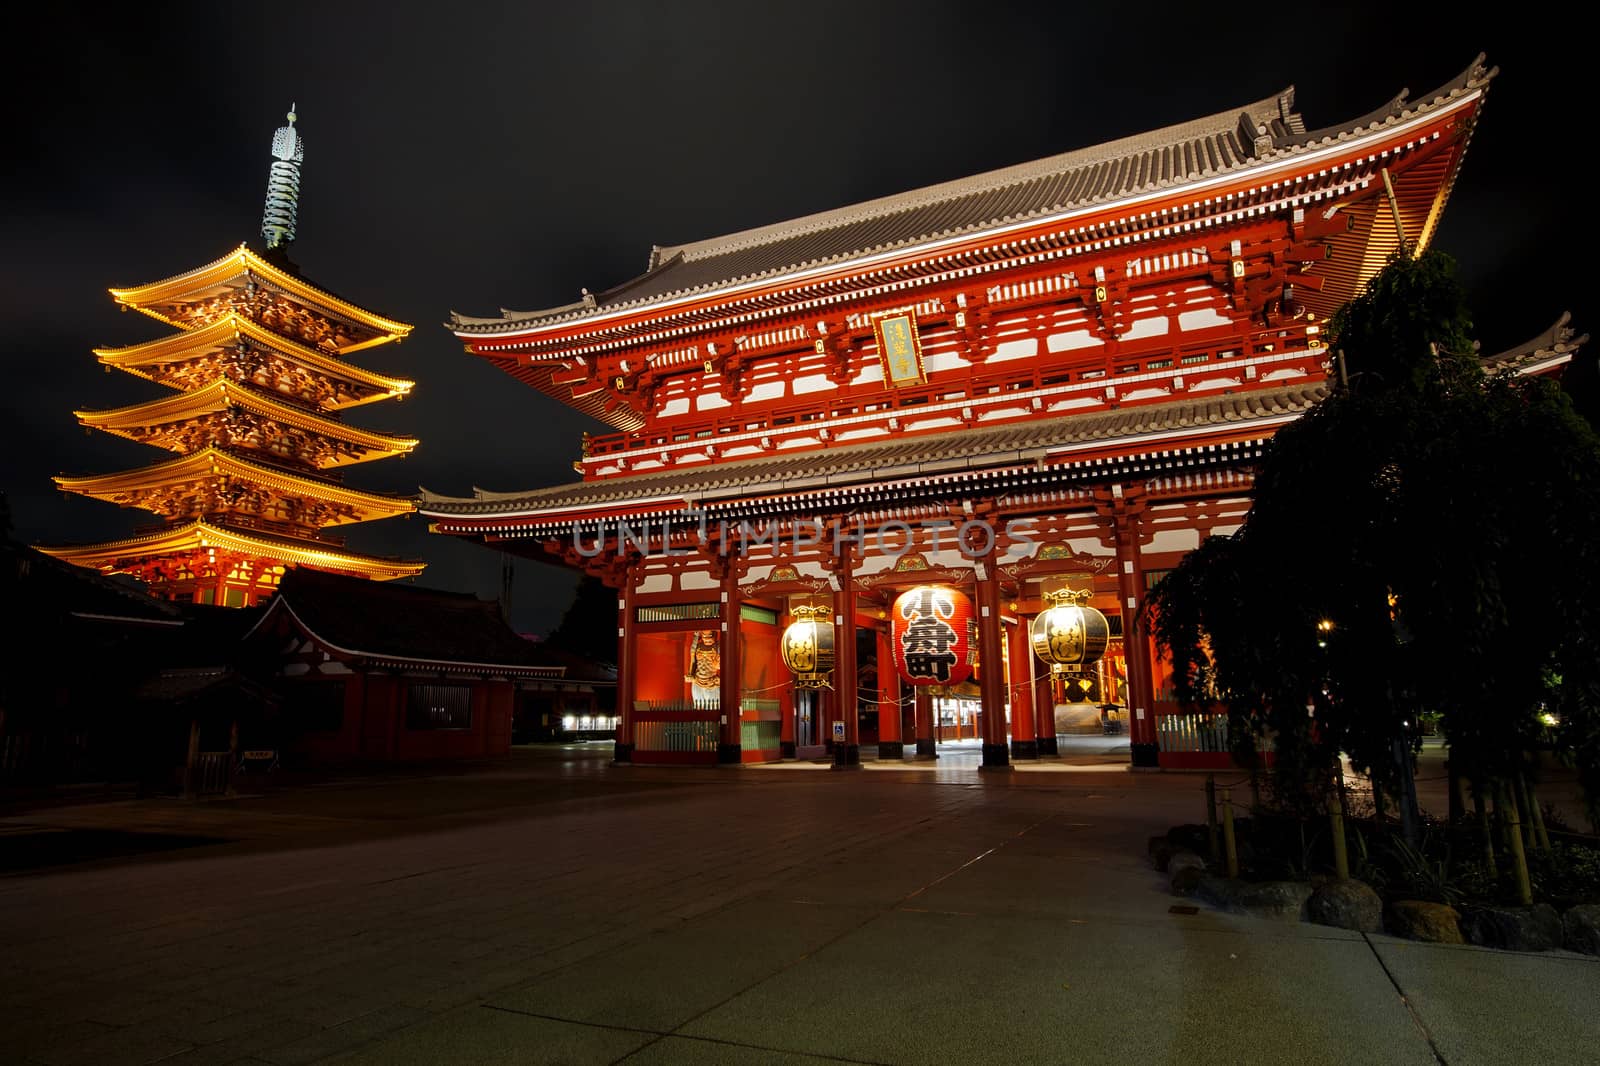 The Asakusa temple with the pagoda at night in Tokyo